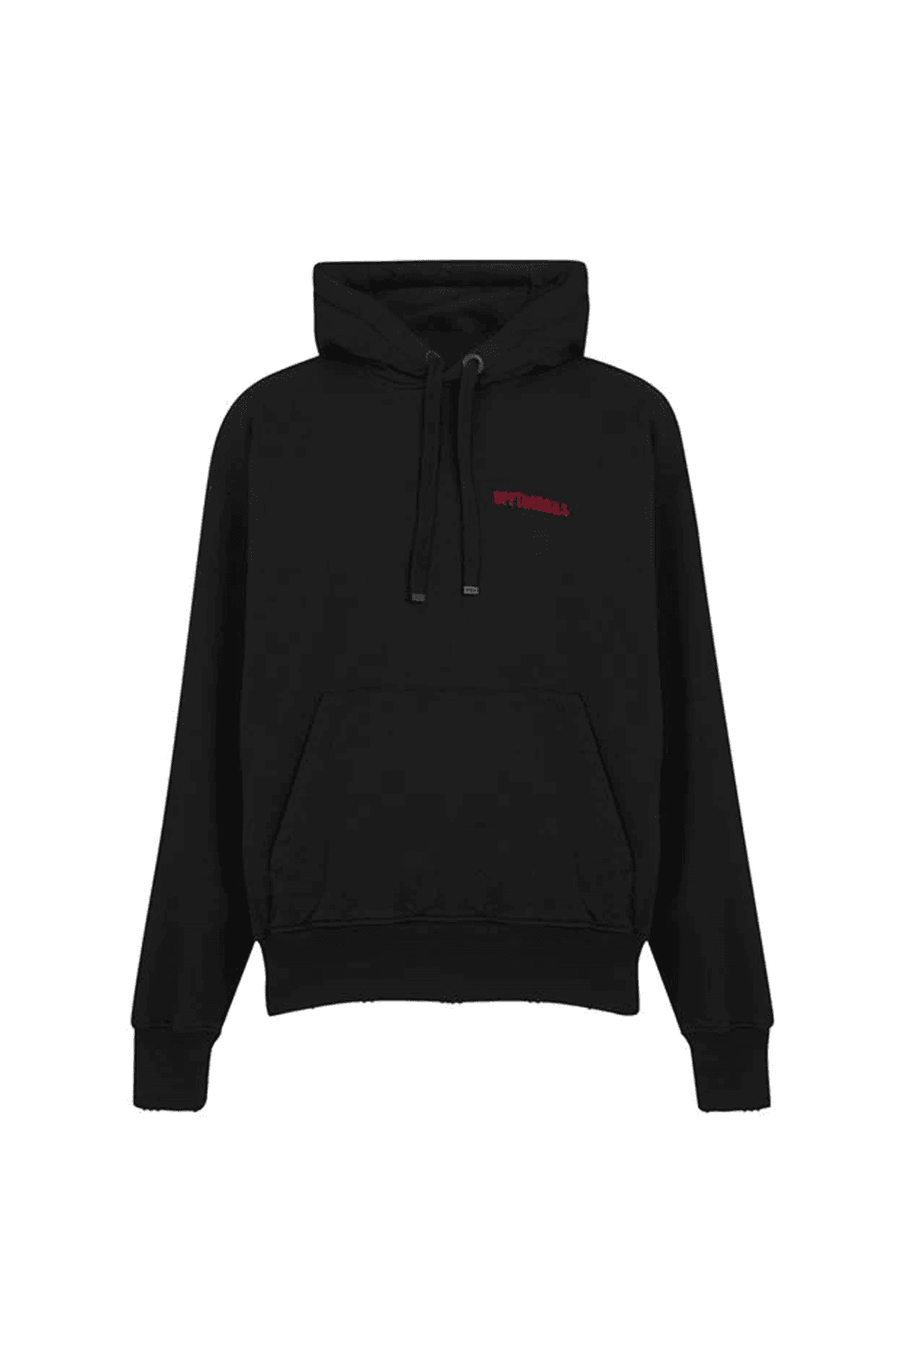 Buy the Off The Rails Heavy Metal Hoodie in Red/Black at Intro. Spend £50 for free UK delivery. Official stockists. We ship worldwide.